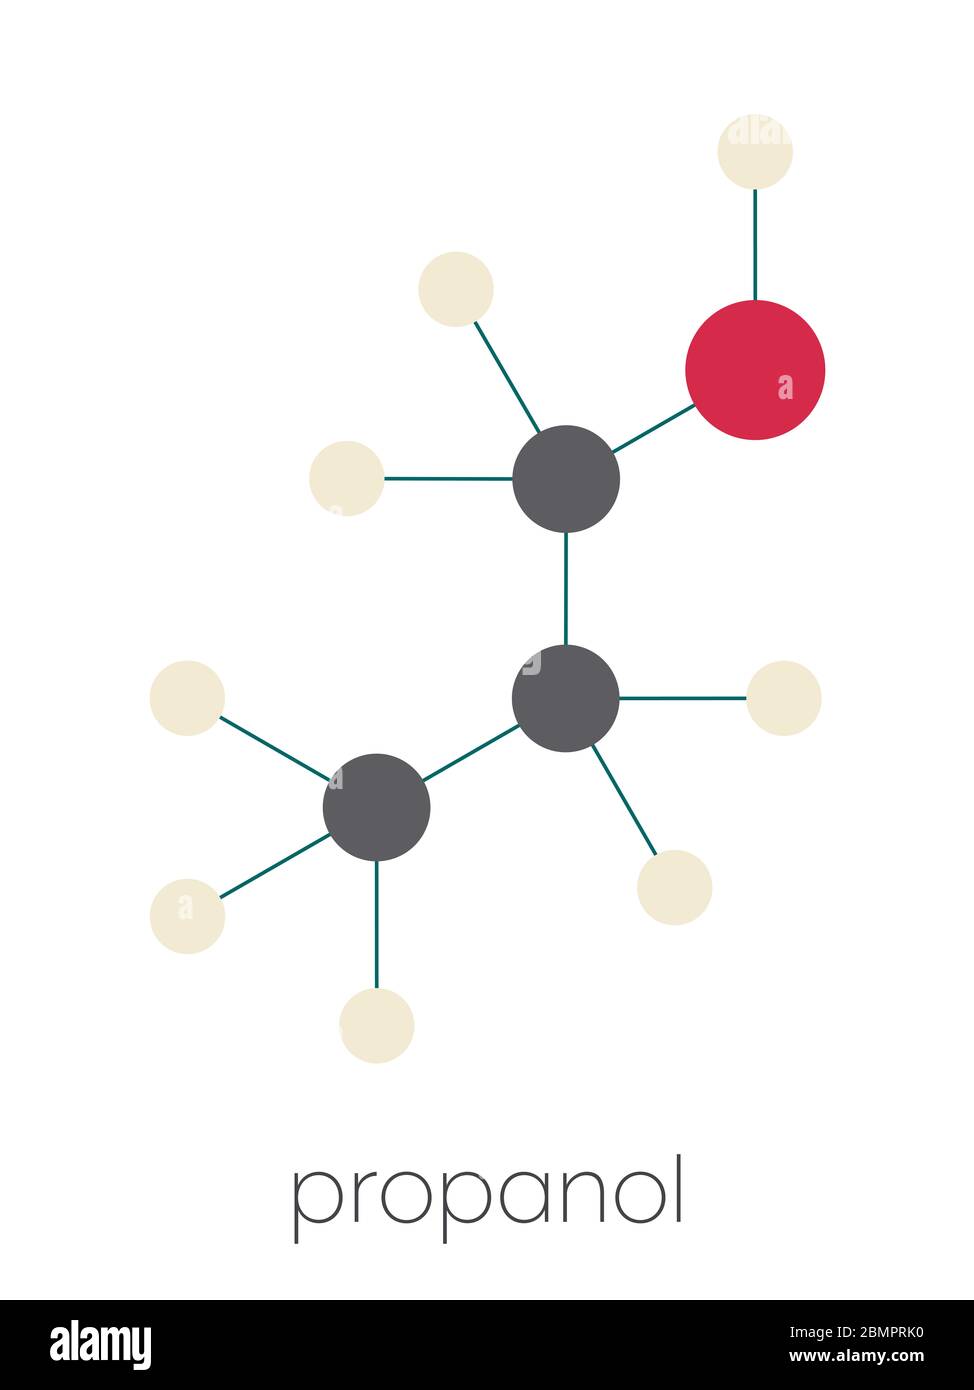 Propanol (n-propanol) solvent molecule. Stylized skeletal formula (chemical structure): Atoms are shown as color-coded circles: hydrogen (beige), carbon (grey), oxygen (red). Stock Photo